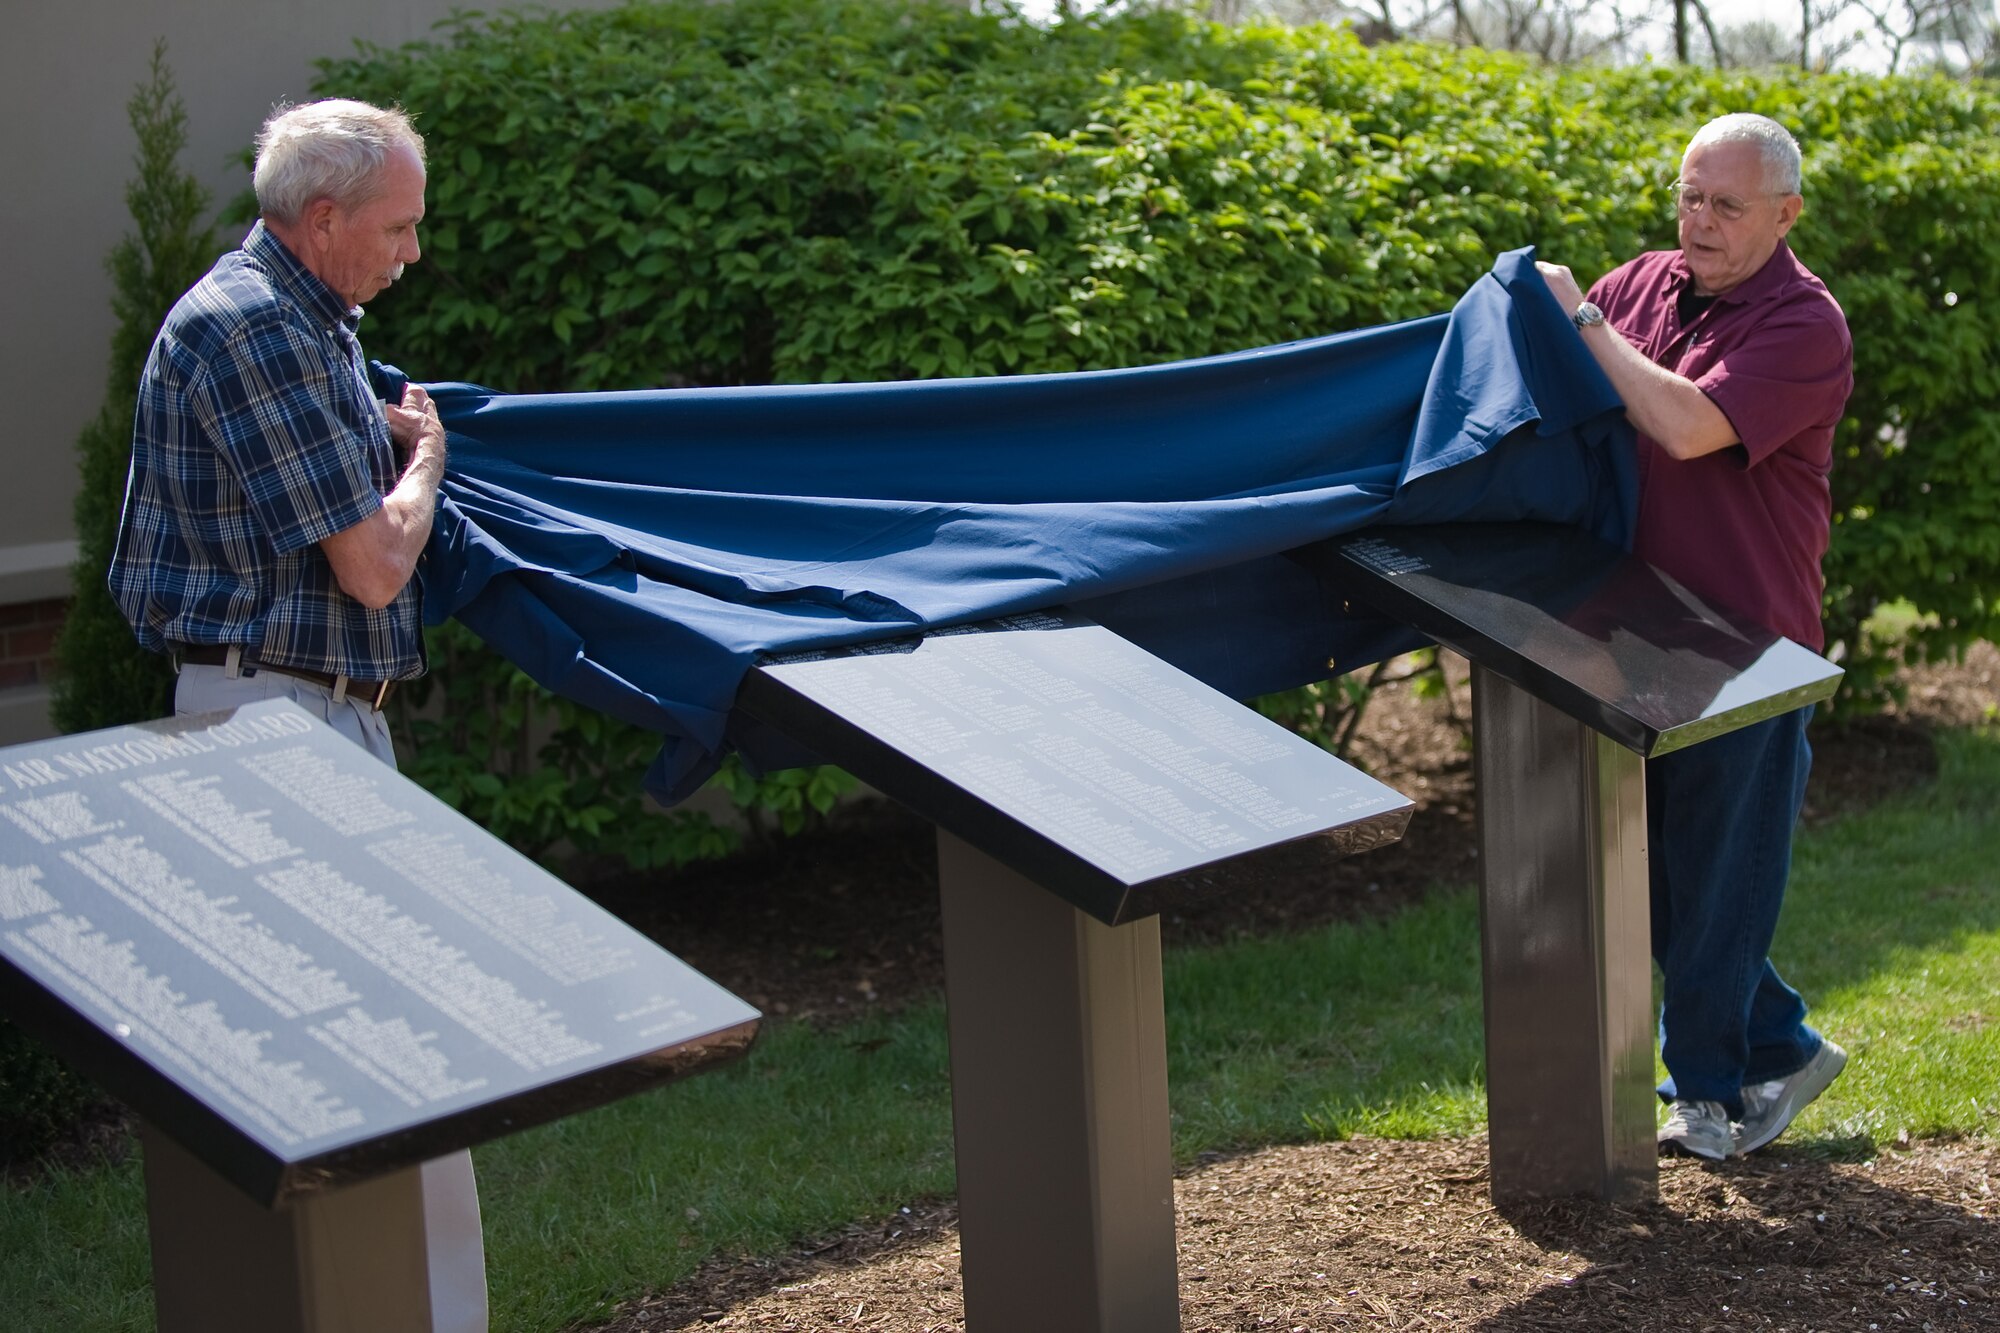 Chief Master Sgt. Jim Turpin (Ret.) and Col. Ed Horung (Ret.) unveil plaques that hold the names of Kentucky Air National Guard retirees from 2007 and 2008 at a ceremony held at the Kentucky Air Guard April 18. (USAF Photo by Capt. Dale Greer.)